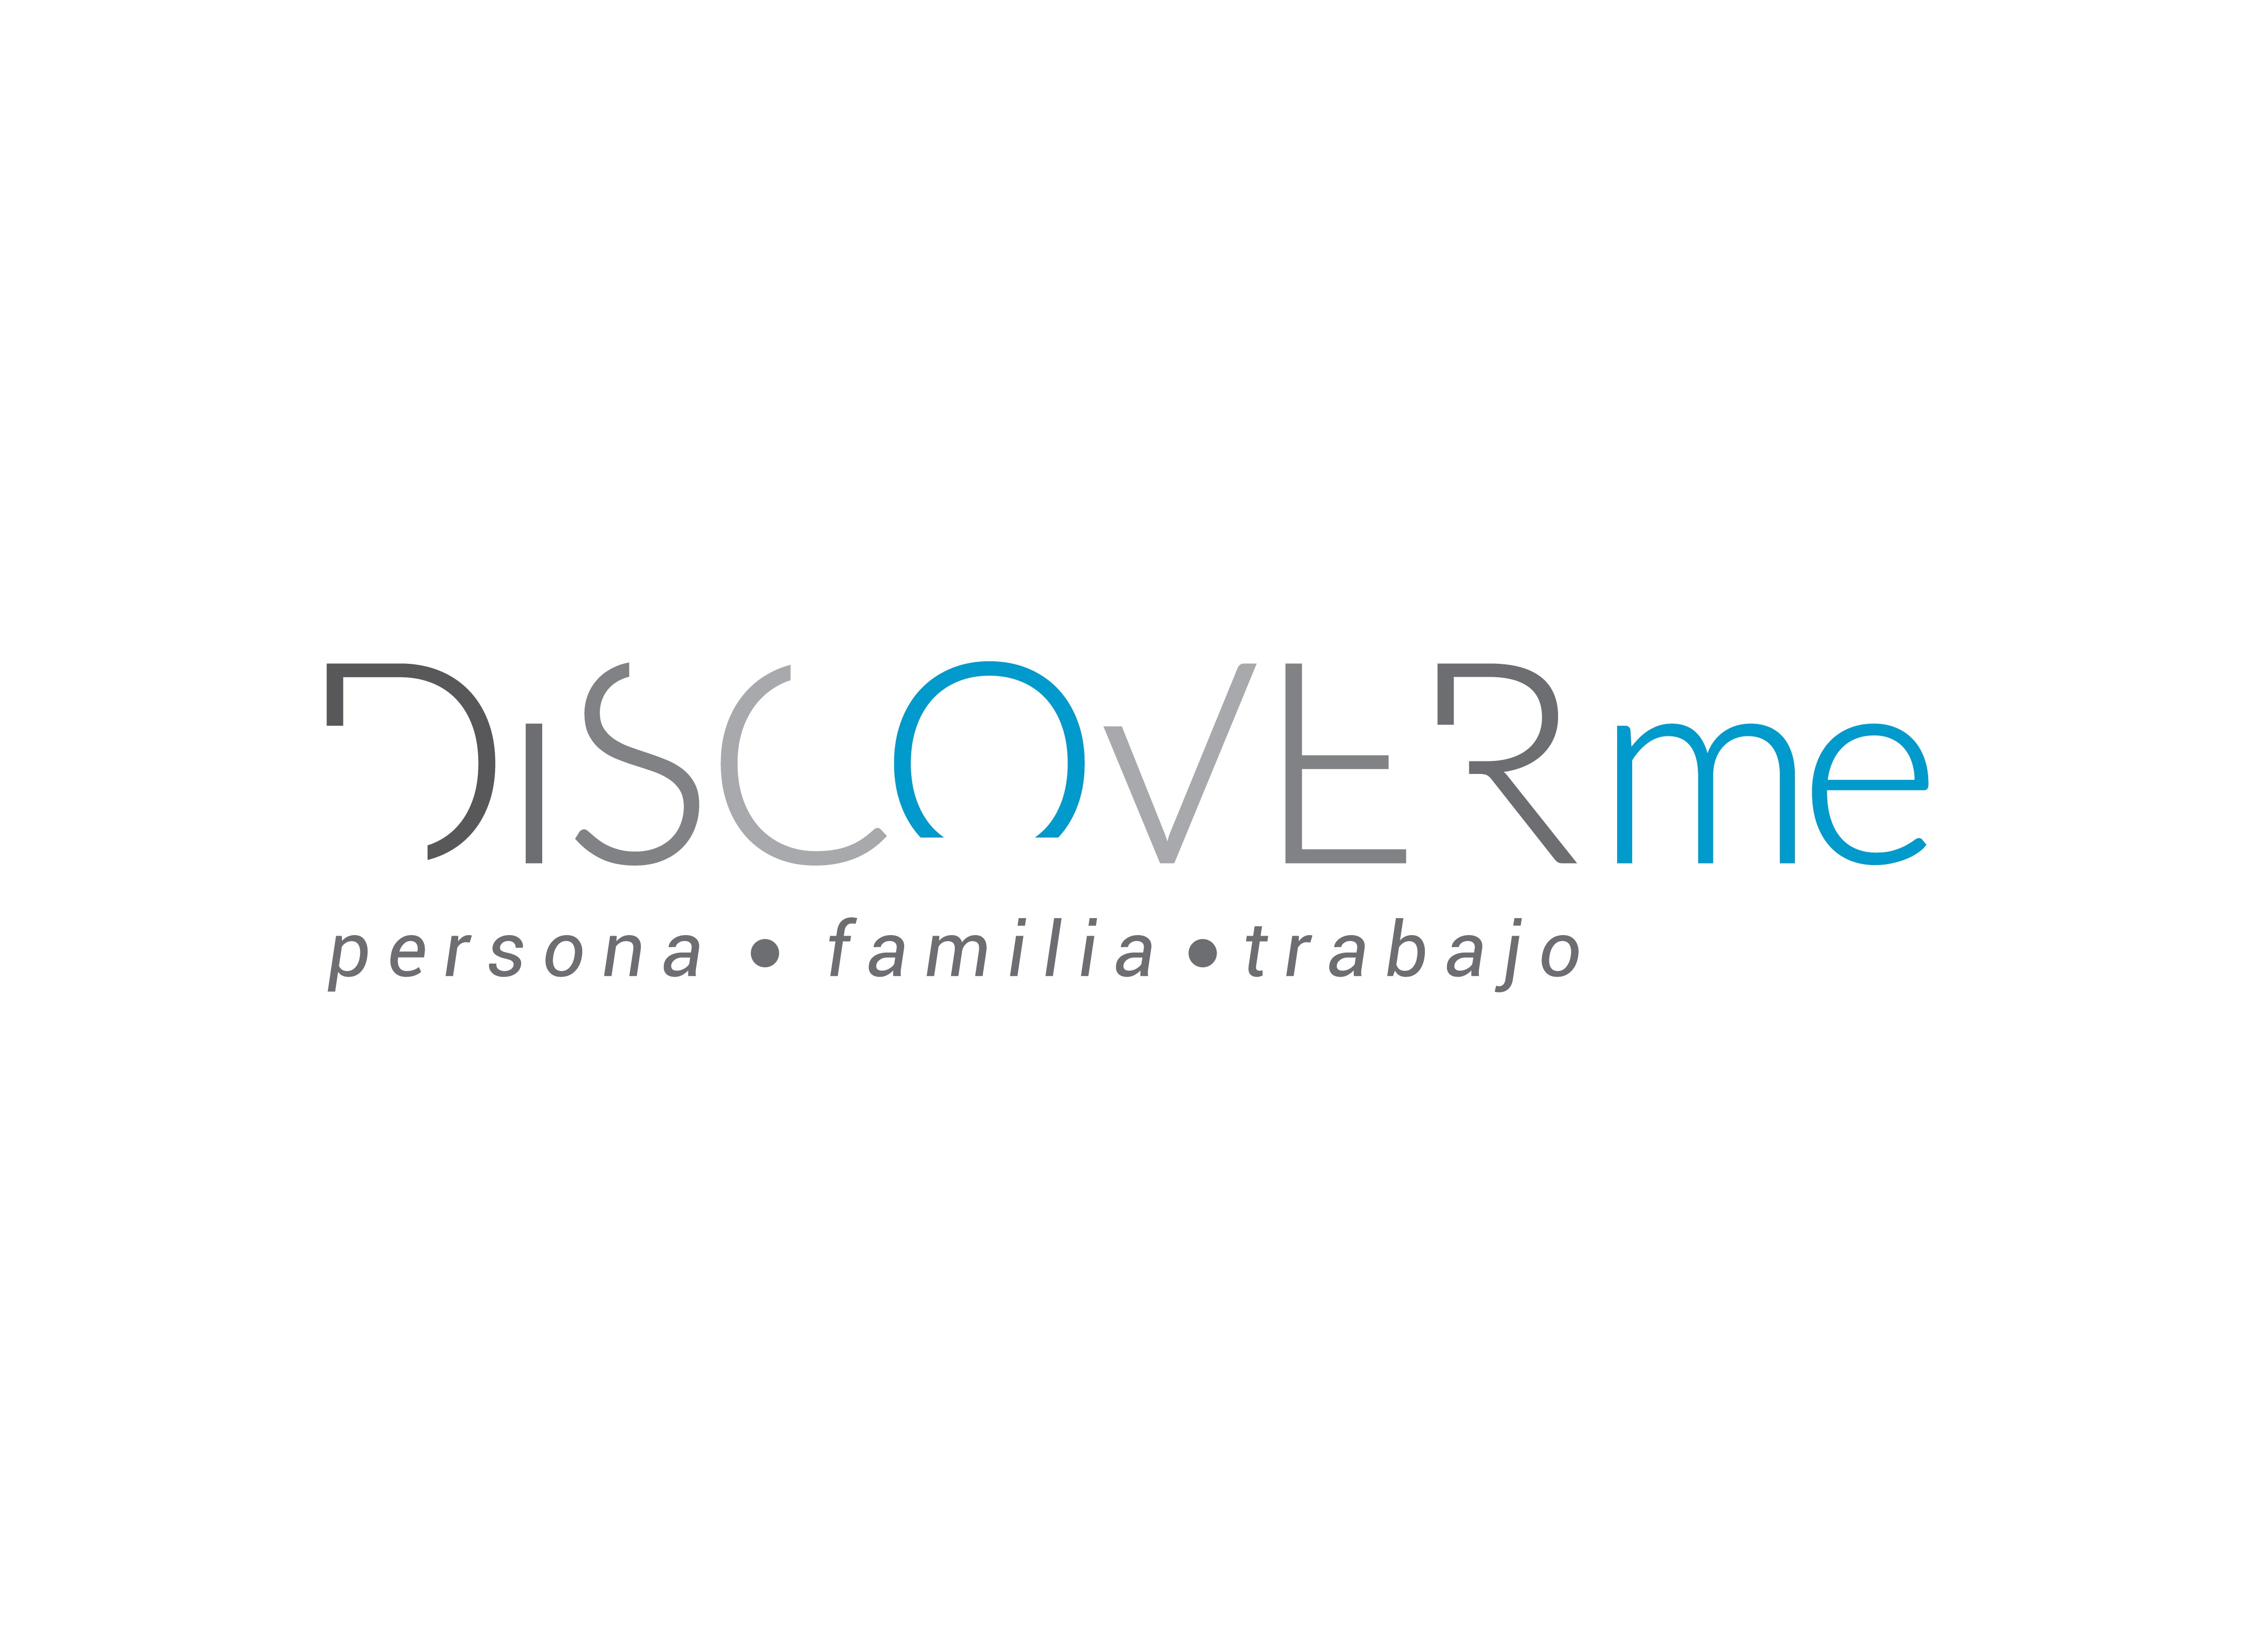 DISCOVERme